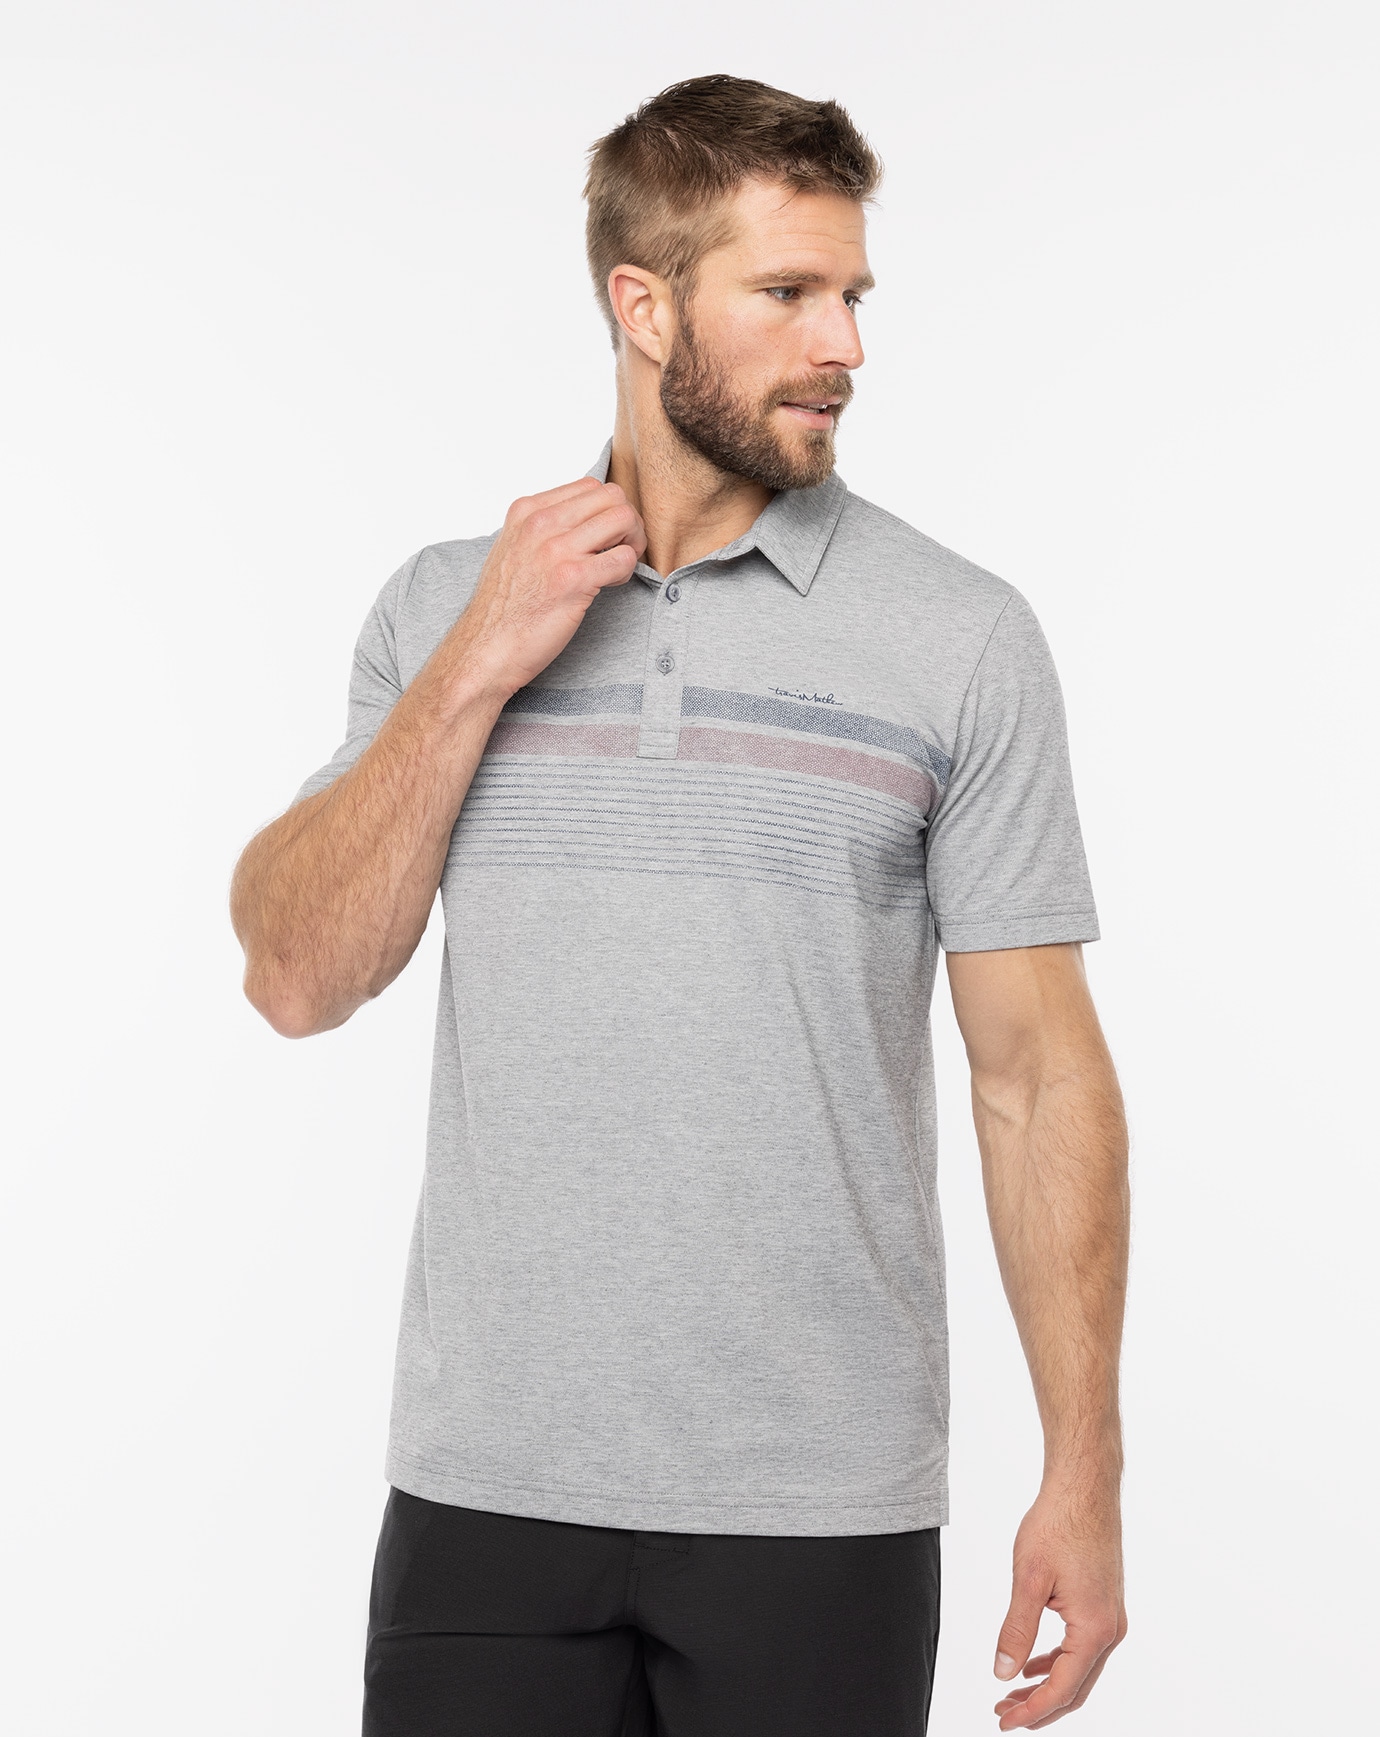 Related Product - CAPTAINS TABLE POLO